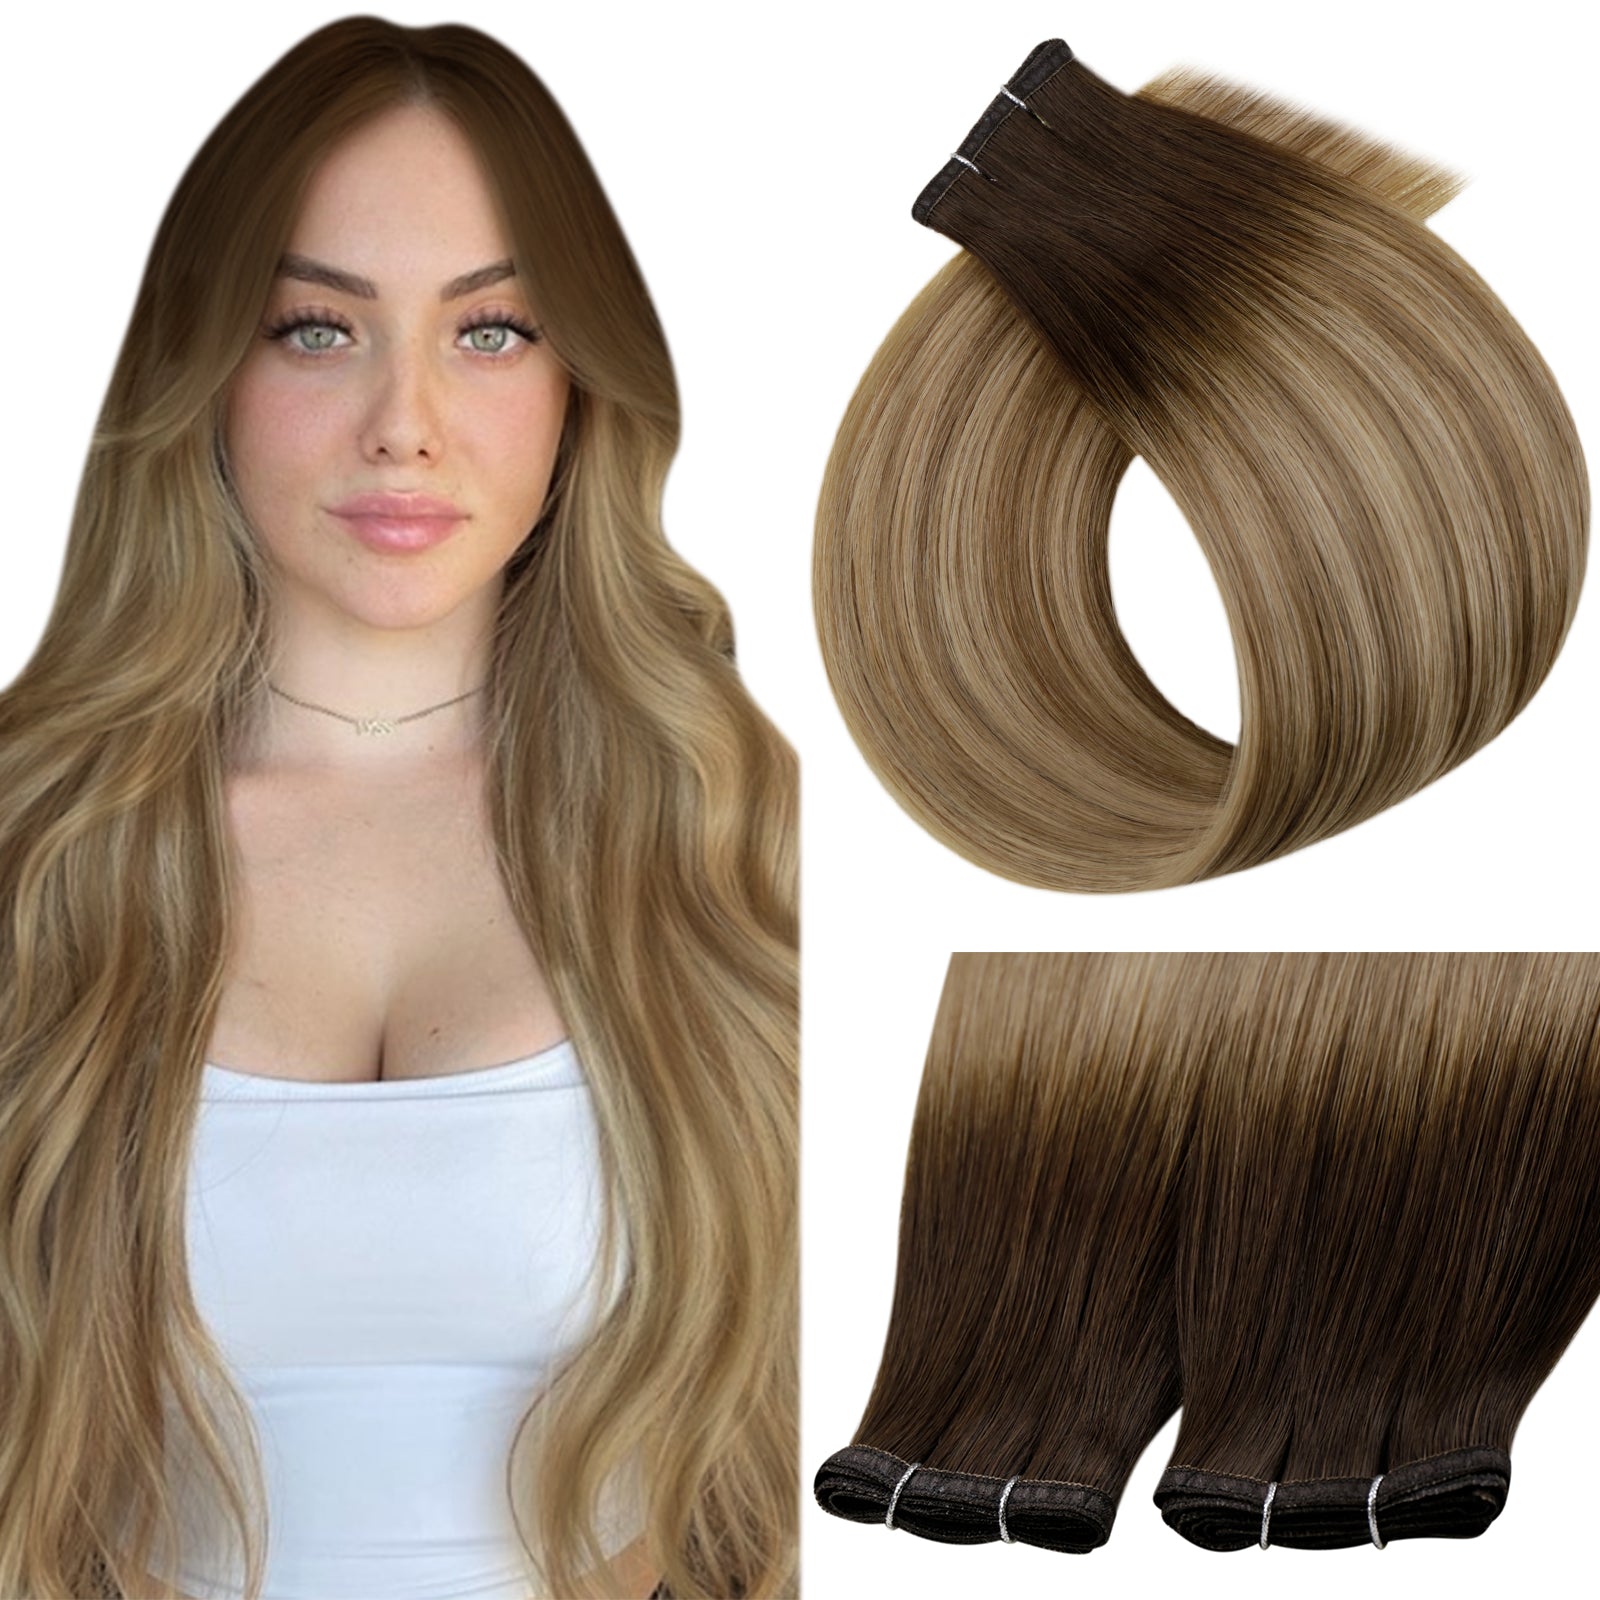 Flat Silk Weft Extensions Seamless Balayage Brown To Blonde #3/8/22| LaaVoo